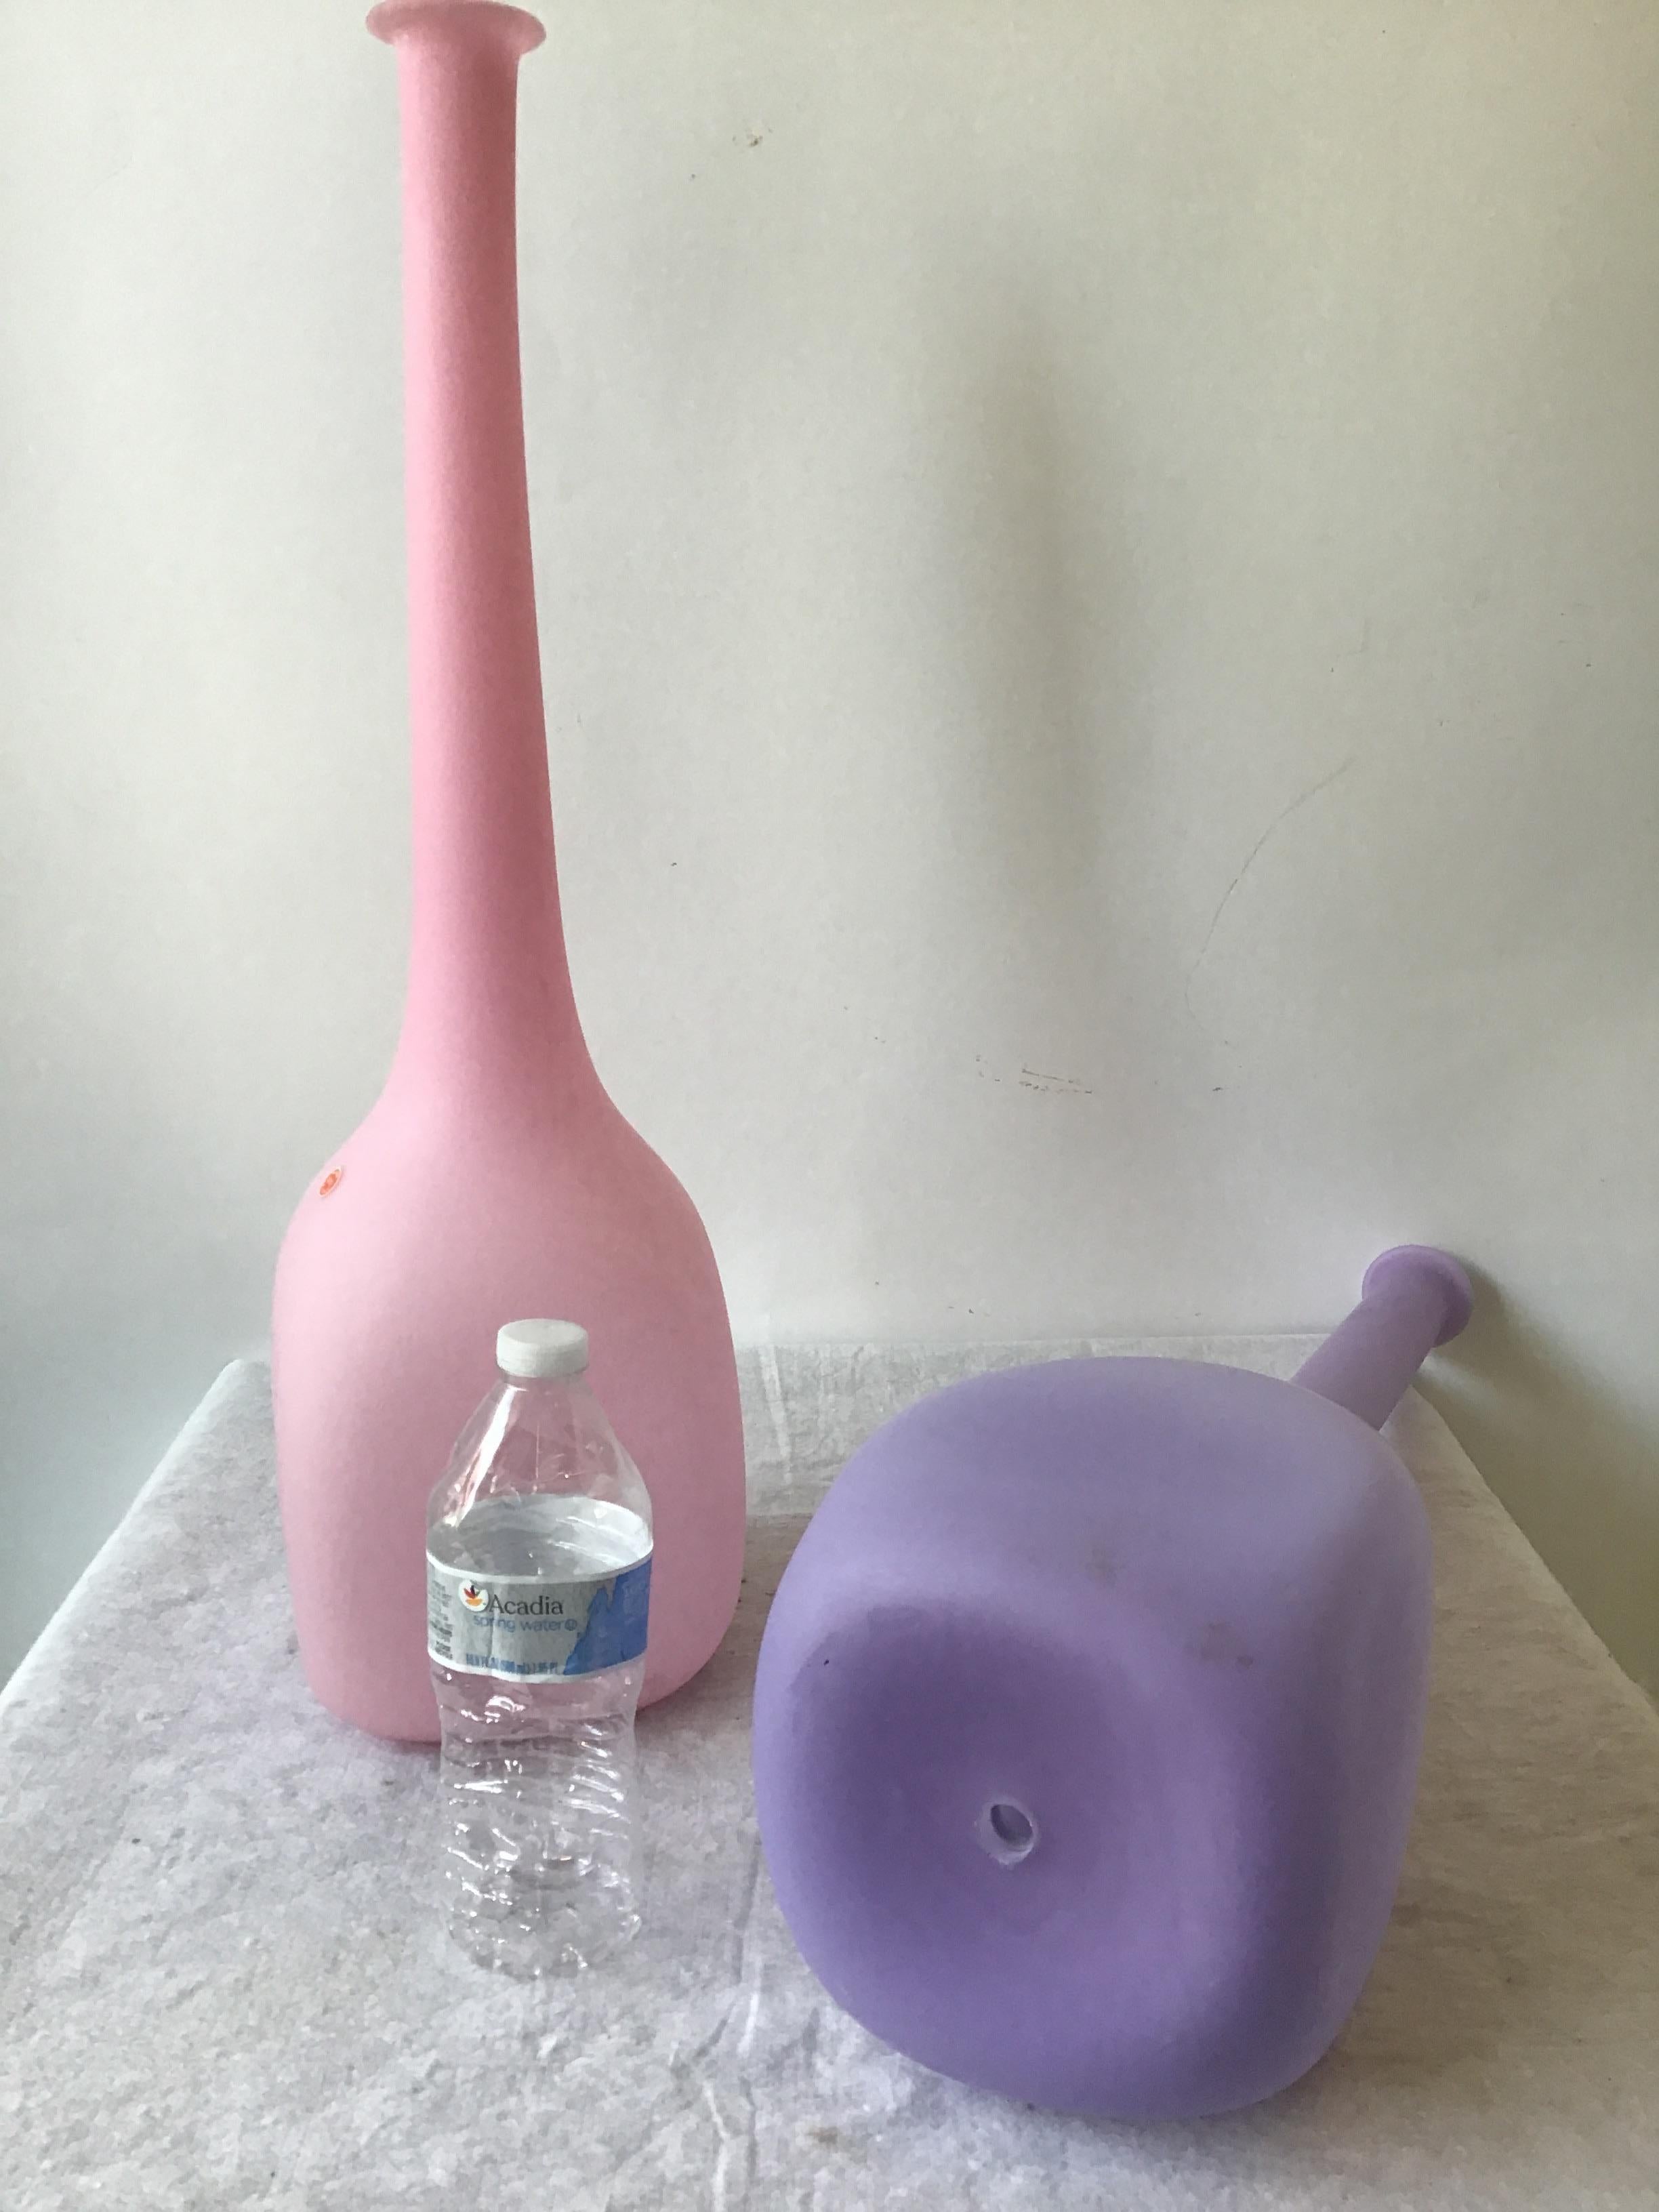 1960s tall pink, or violet Frosted Murano lamp bodies. There are about 20 of these, found in an importers warehouse, from the 1960s, but never been used. Still in the original wrapping.
Lamp bodies need all parts in order to be turned into